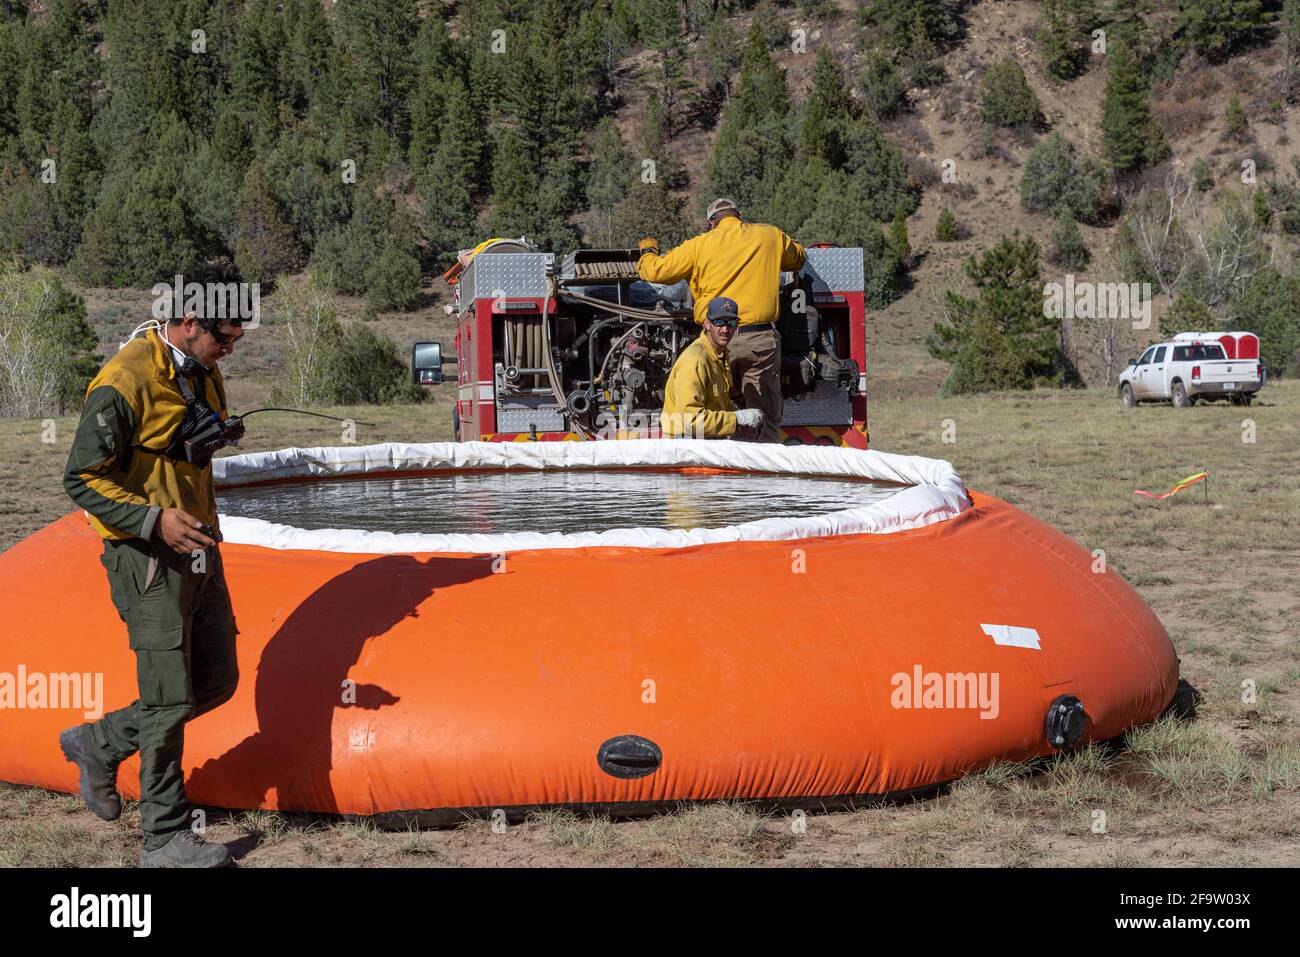 Forest Service fire fighters working a fire in New Mexico, a large orange portable water tank in the foreground. Stock Photo